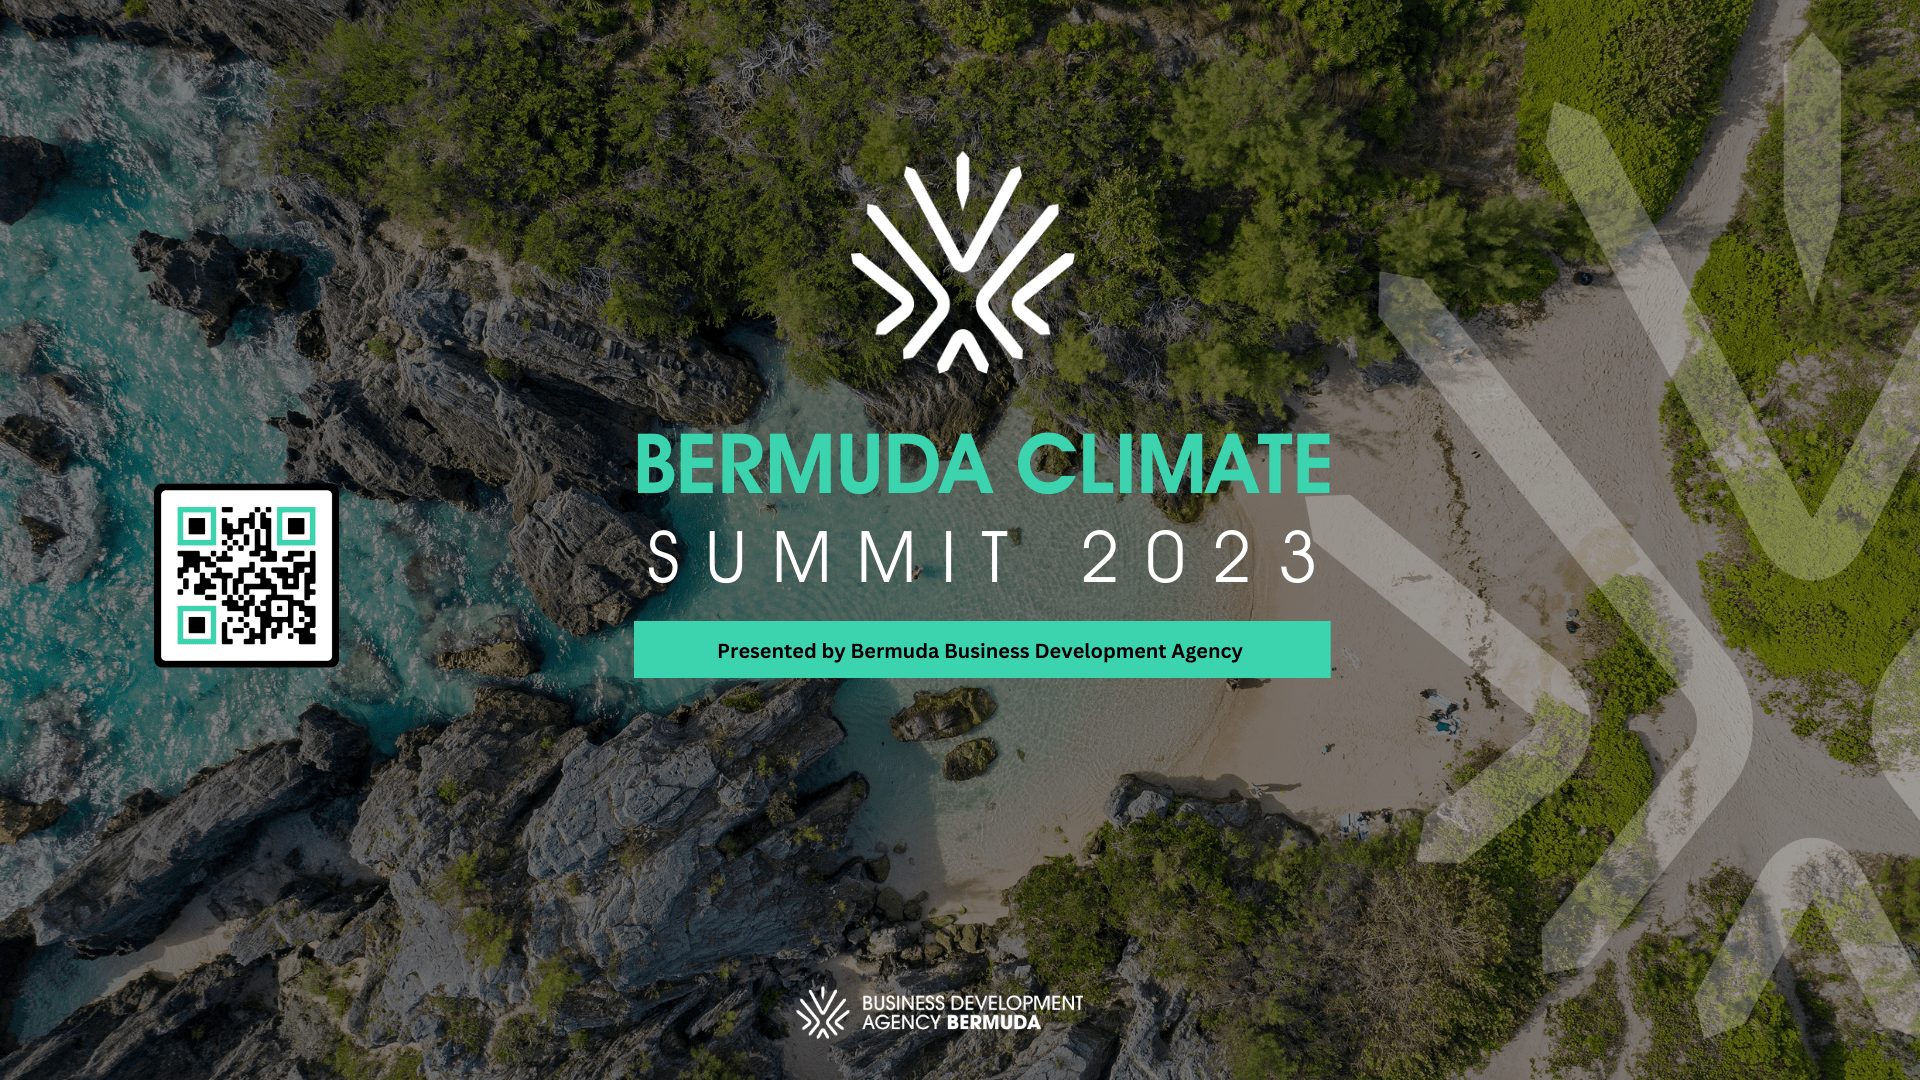 BDA to Hold Second Annual Bermuda Climate Summit, June 26-27